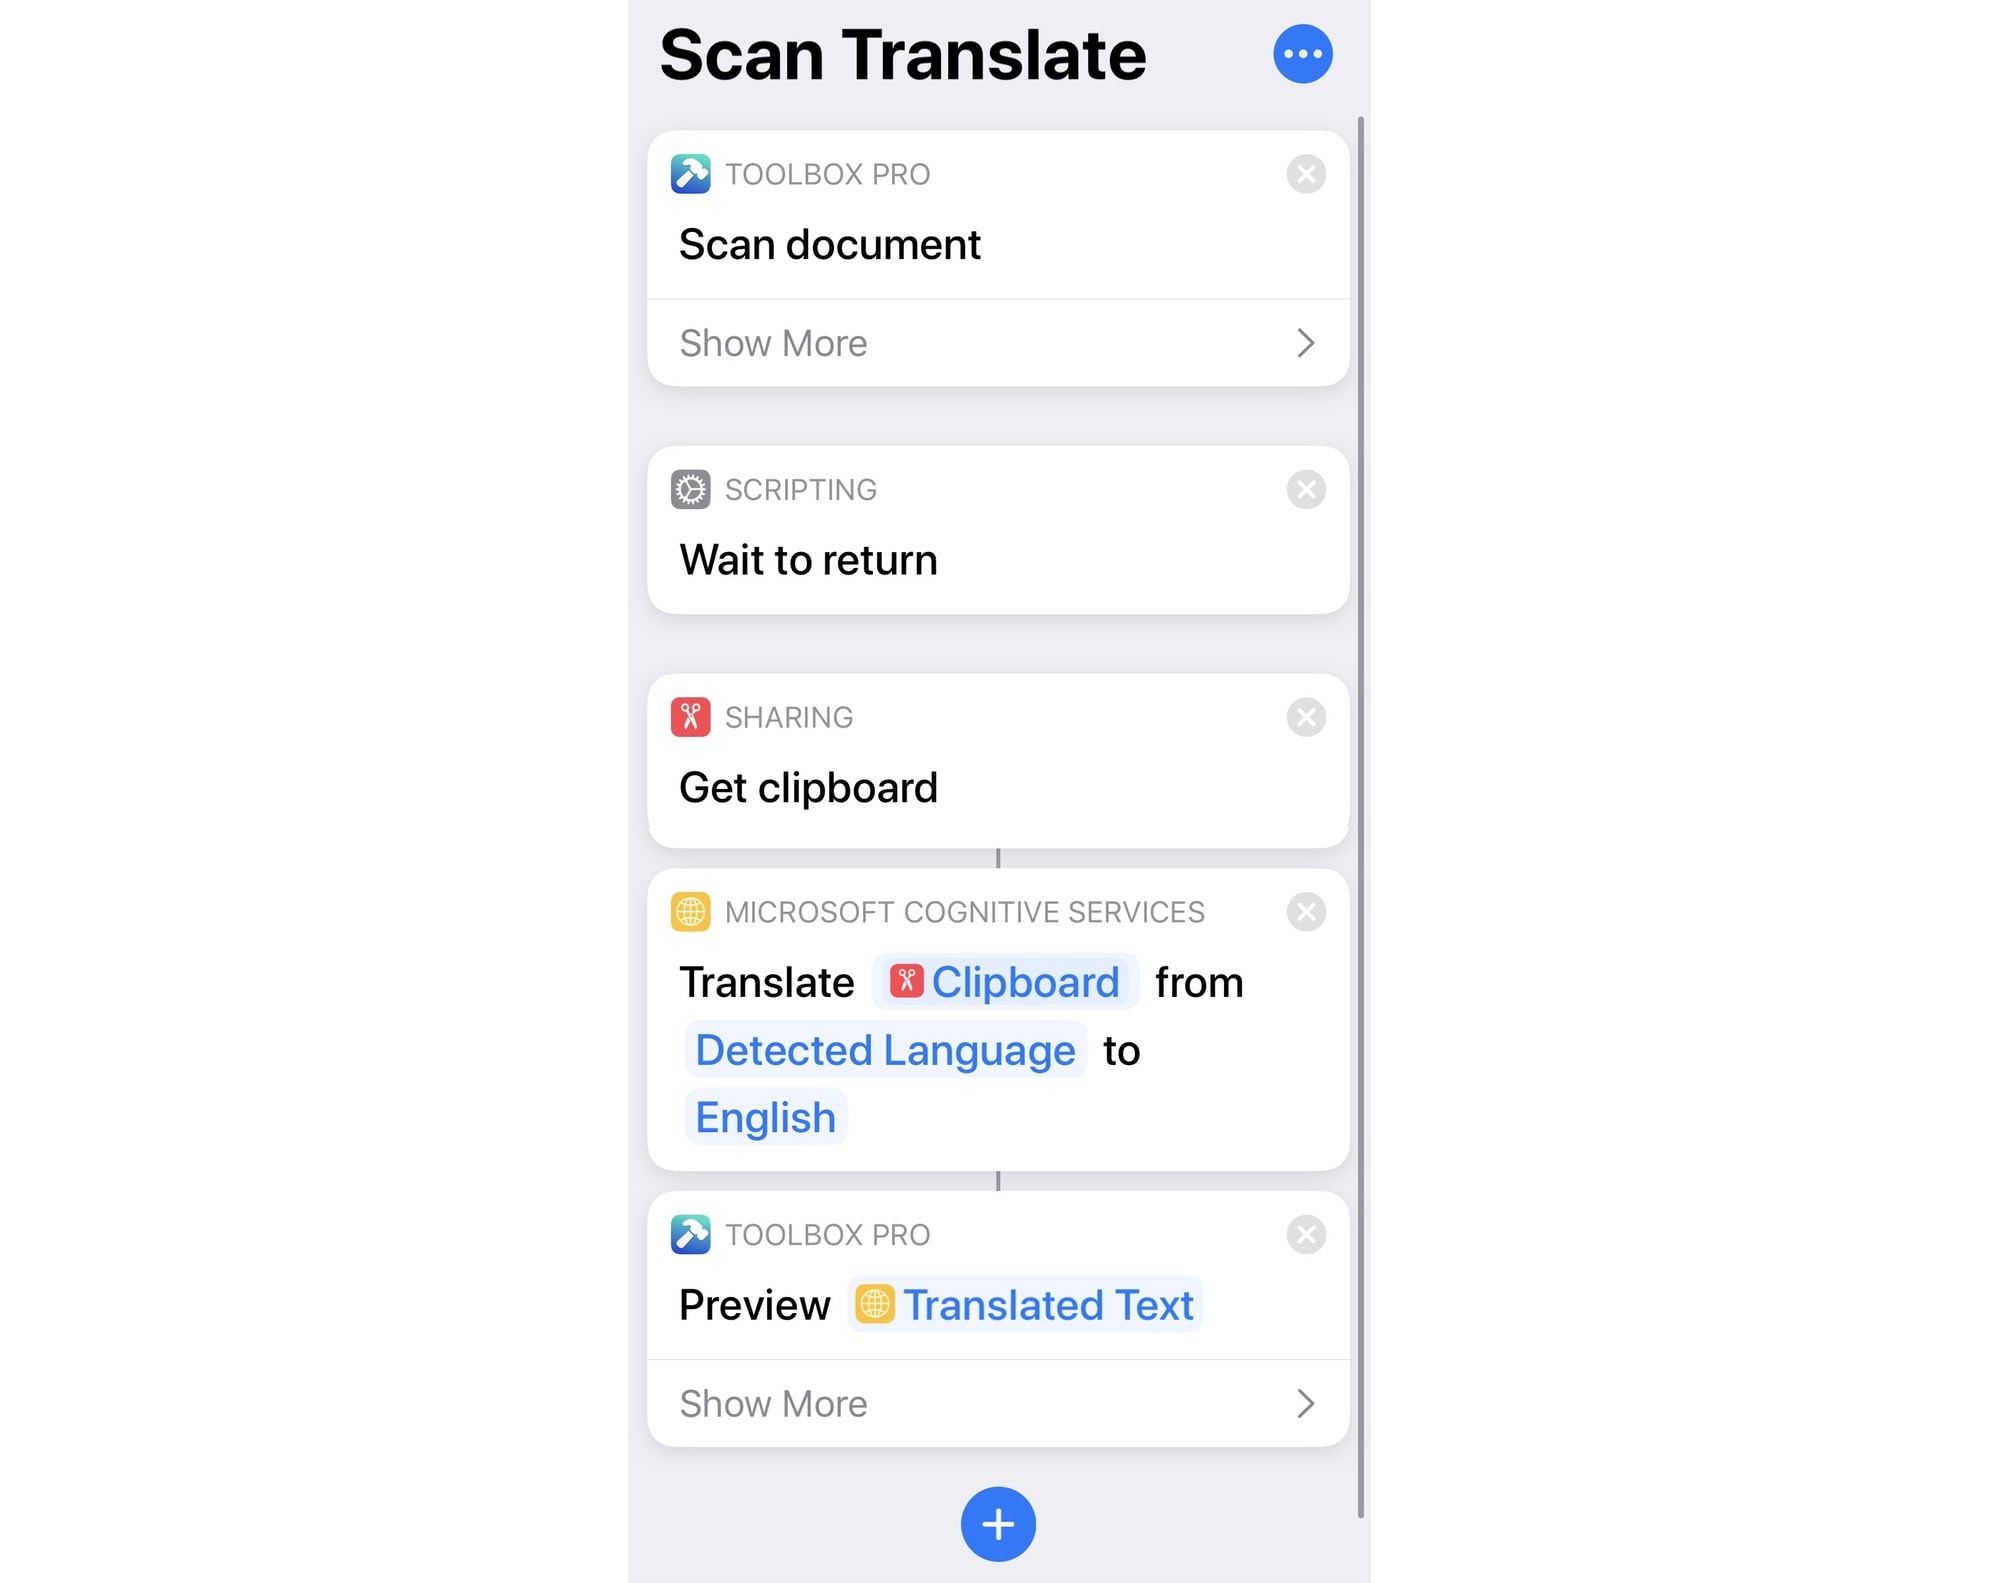 Look how simple this text-translation shortcut is!